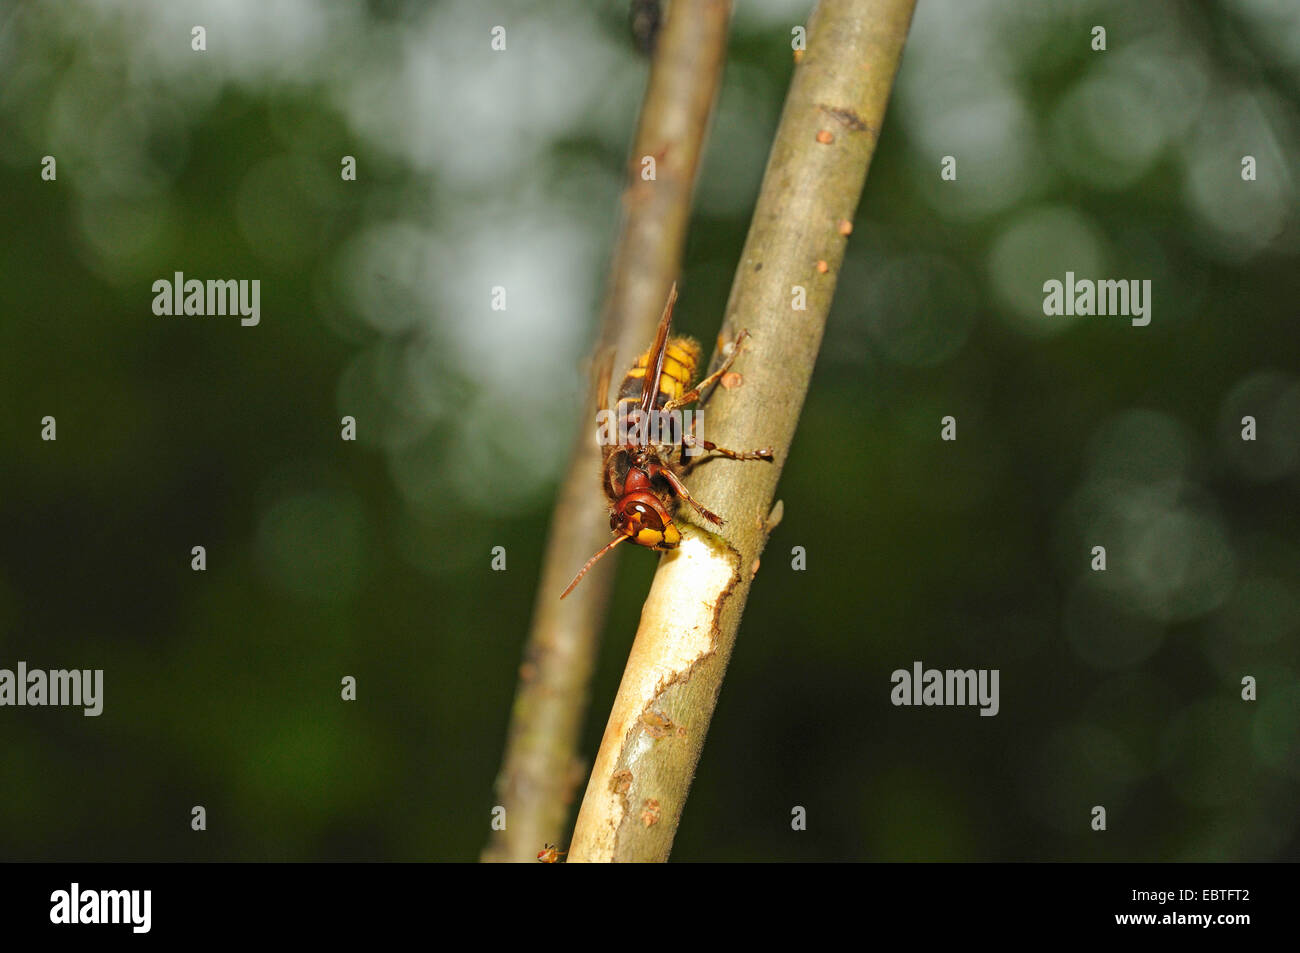 hornet, brown hornet, European hornet (Vespa crabro), sitting at a young branch drinking tree sap, Germany, North Rhine-Westphalia Stock Photo